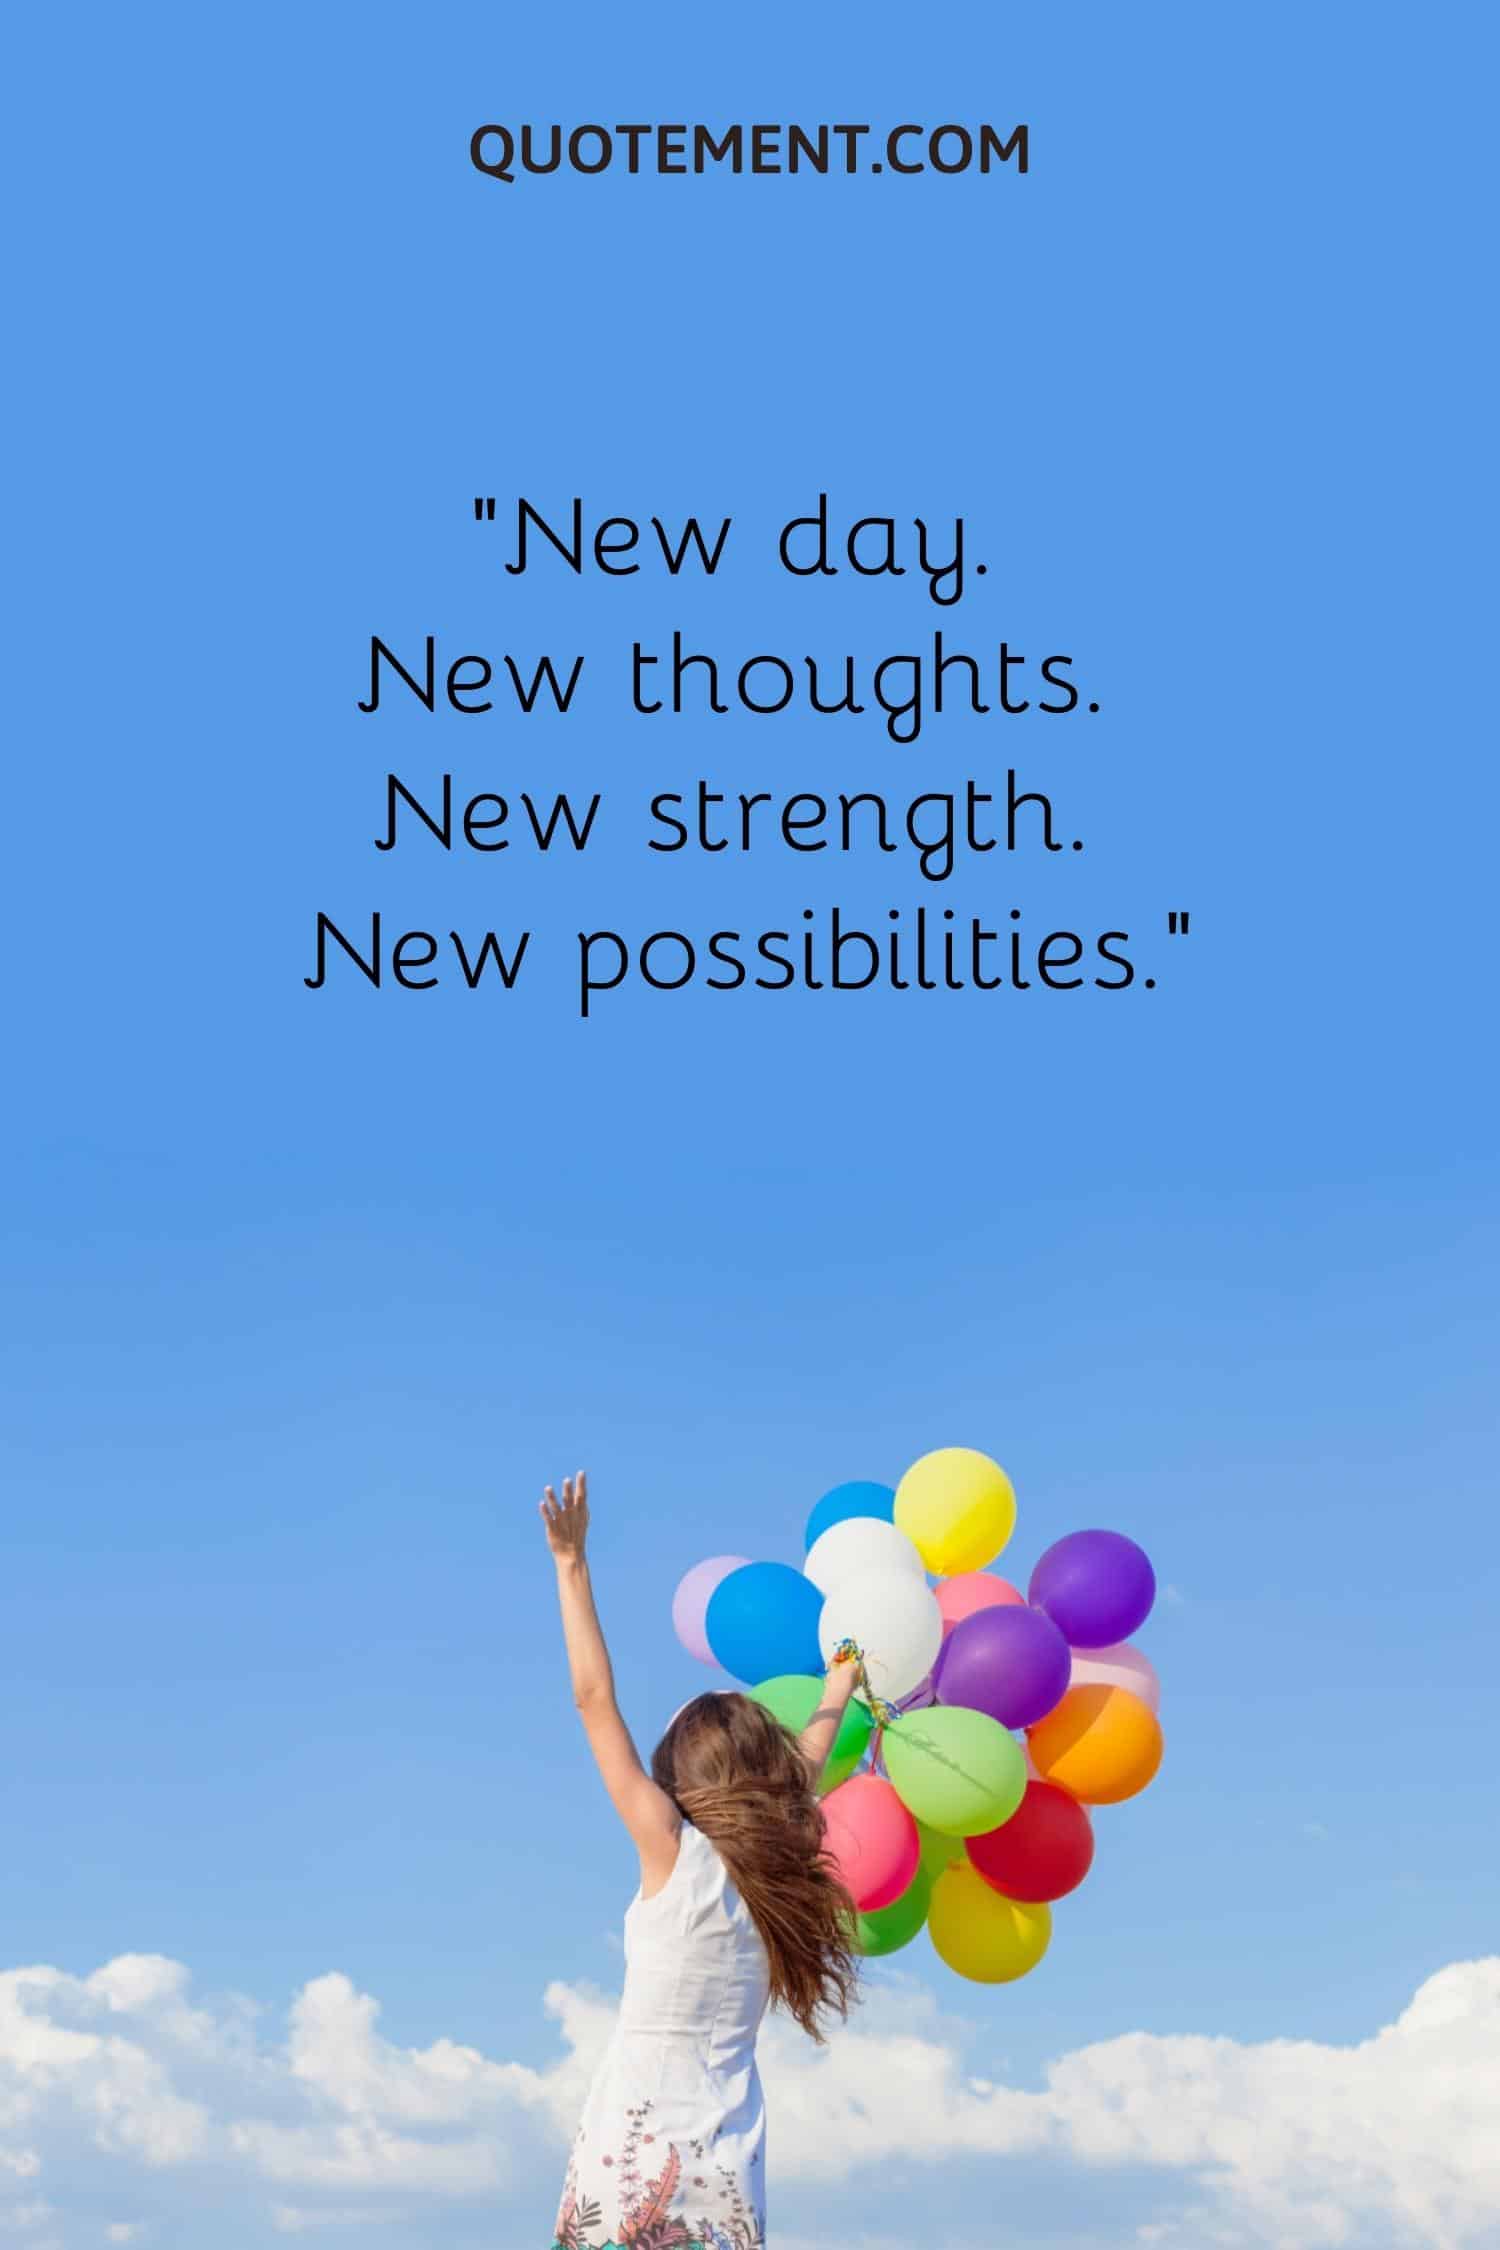 New day. New thoughts. New strength. New possibilities